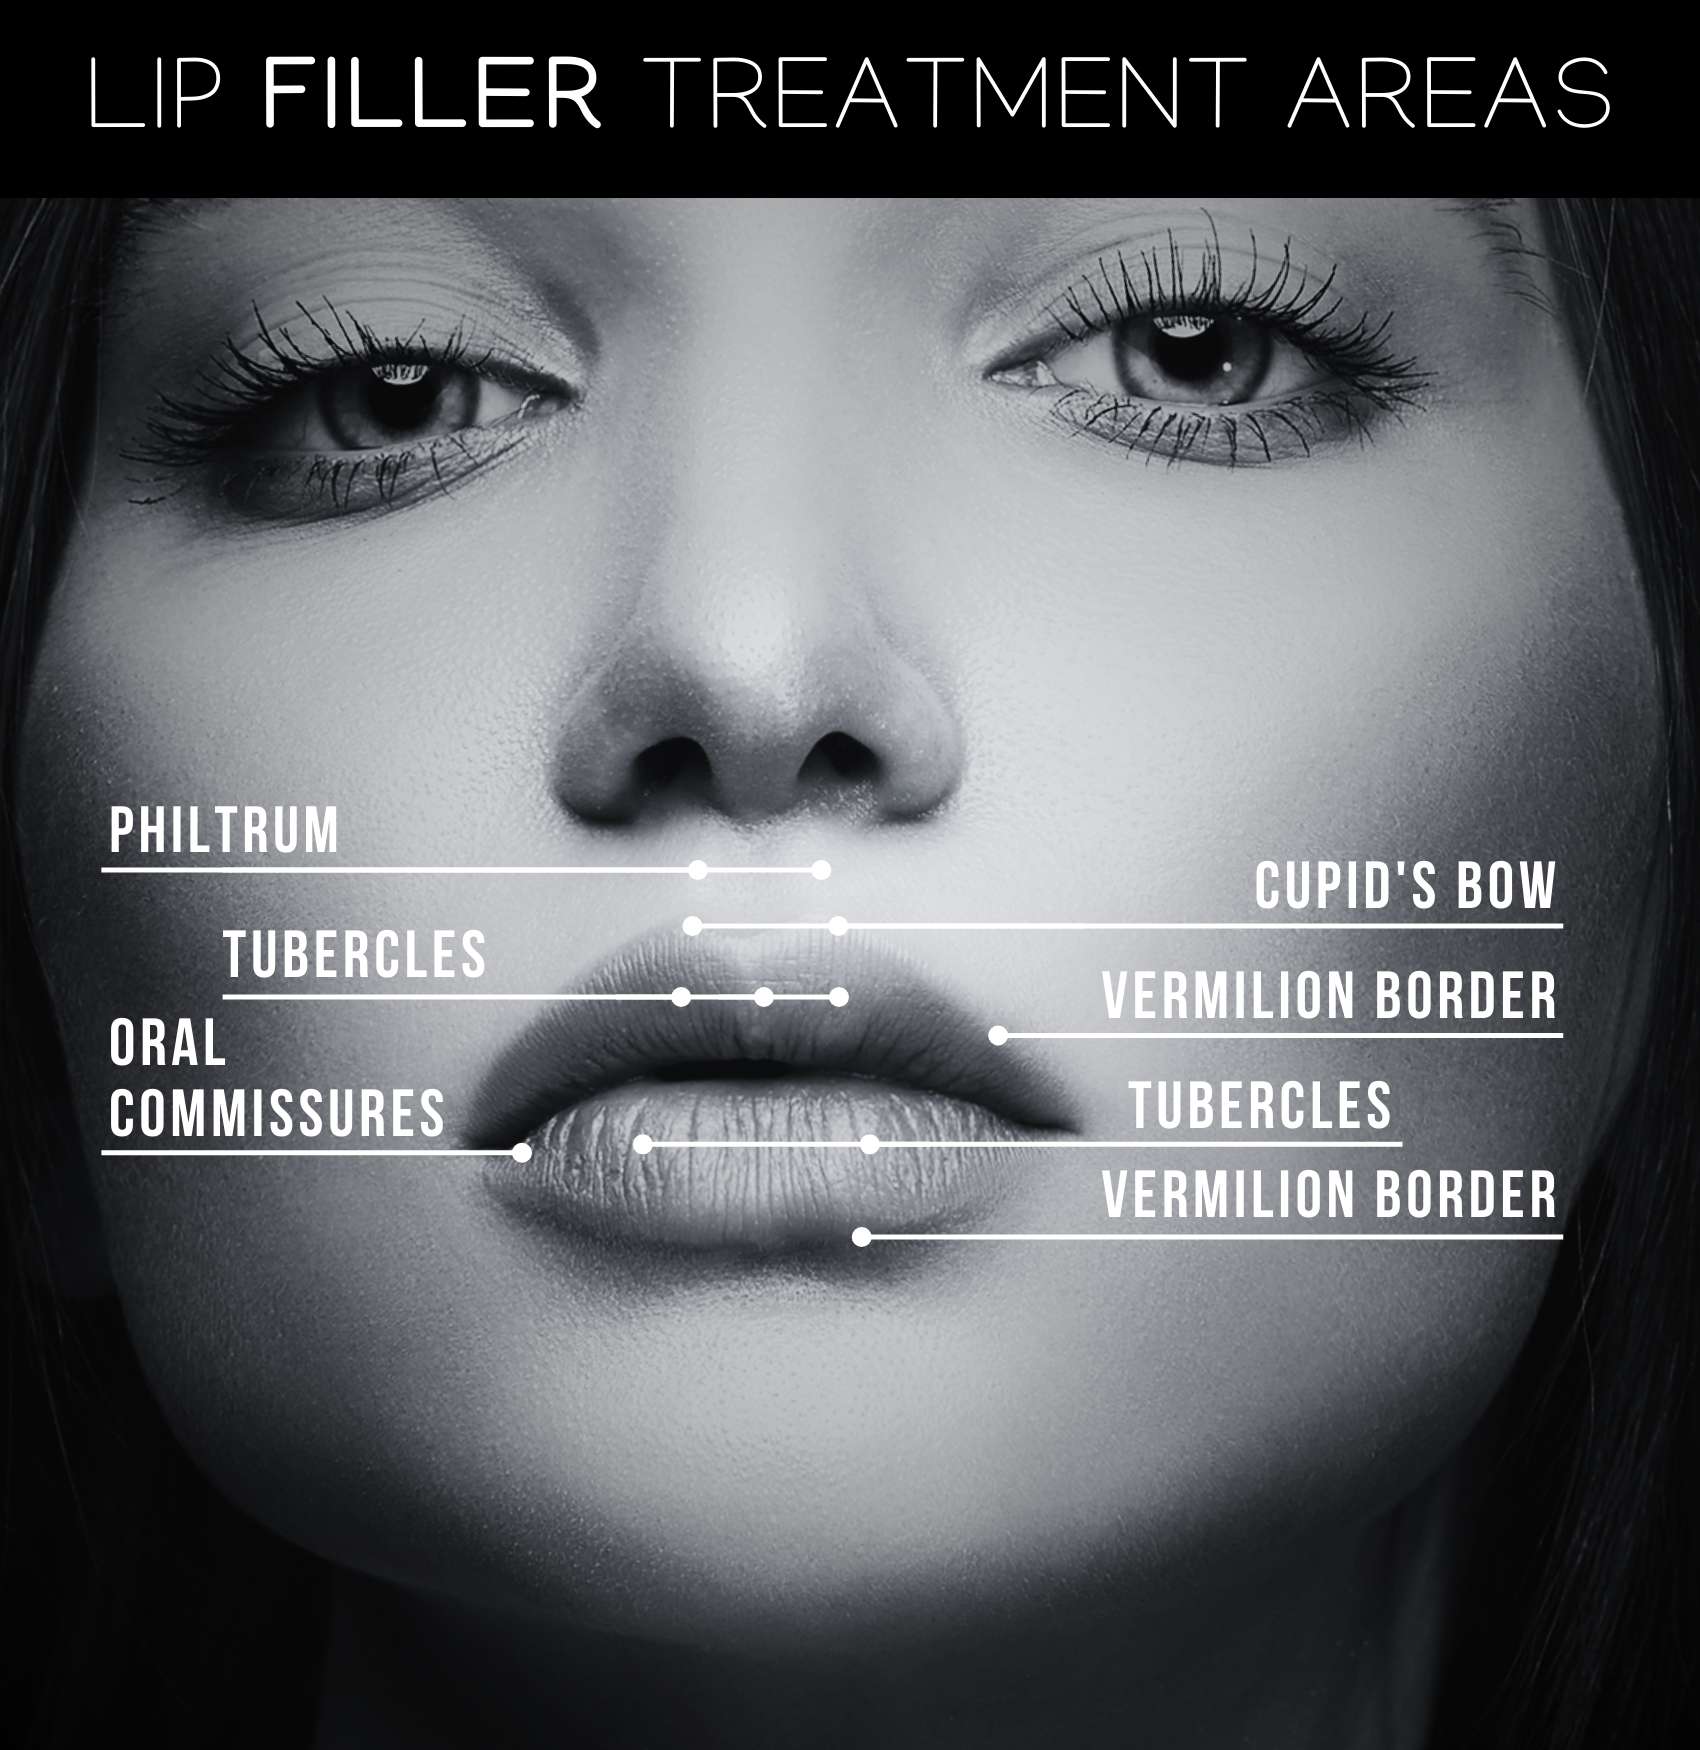 An image showing the anatomy of lips.